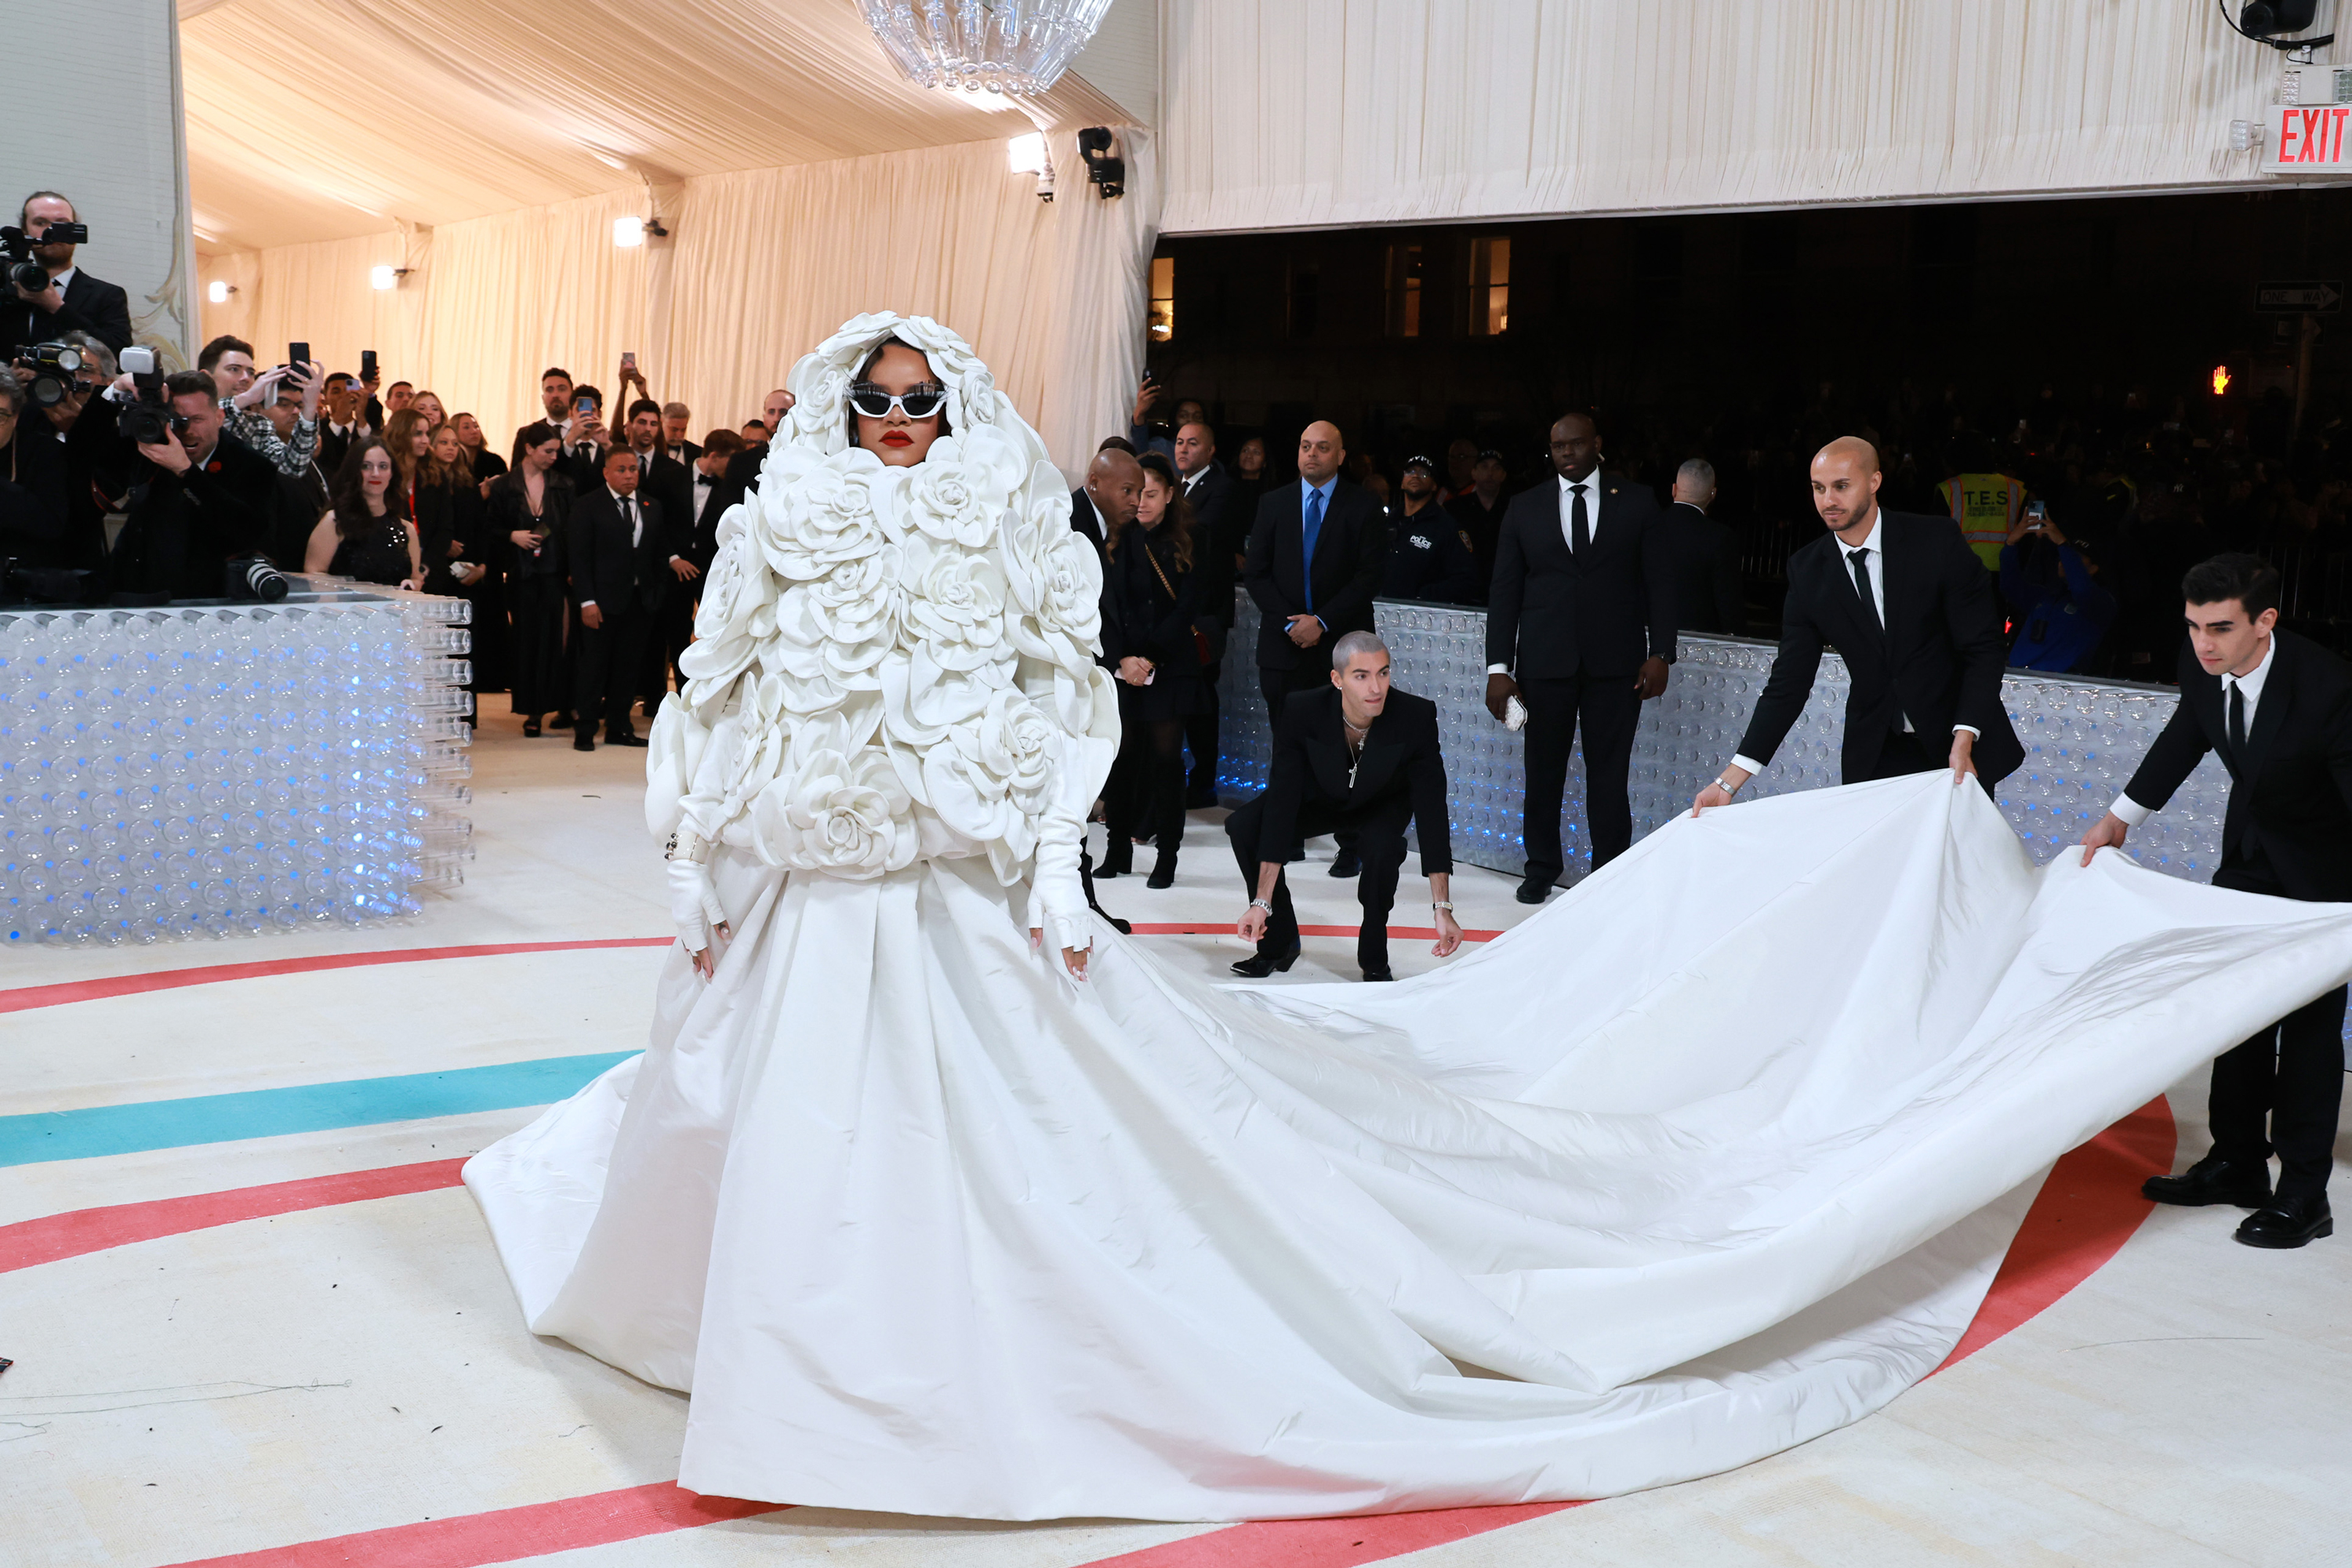 Rihanna puts her own spin on the Chanel bride at the Met Gala - CNN Style